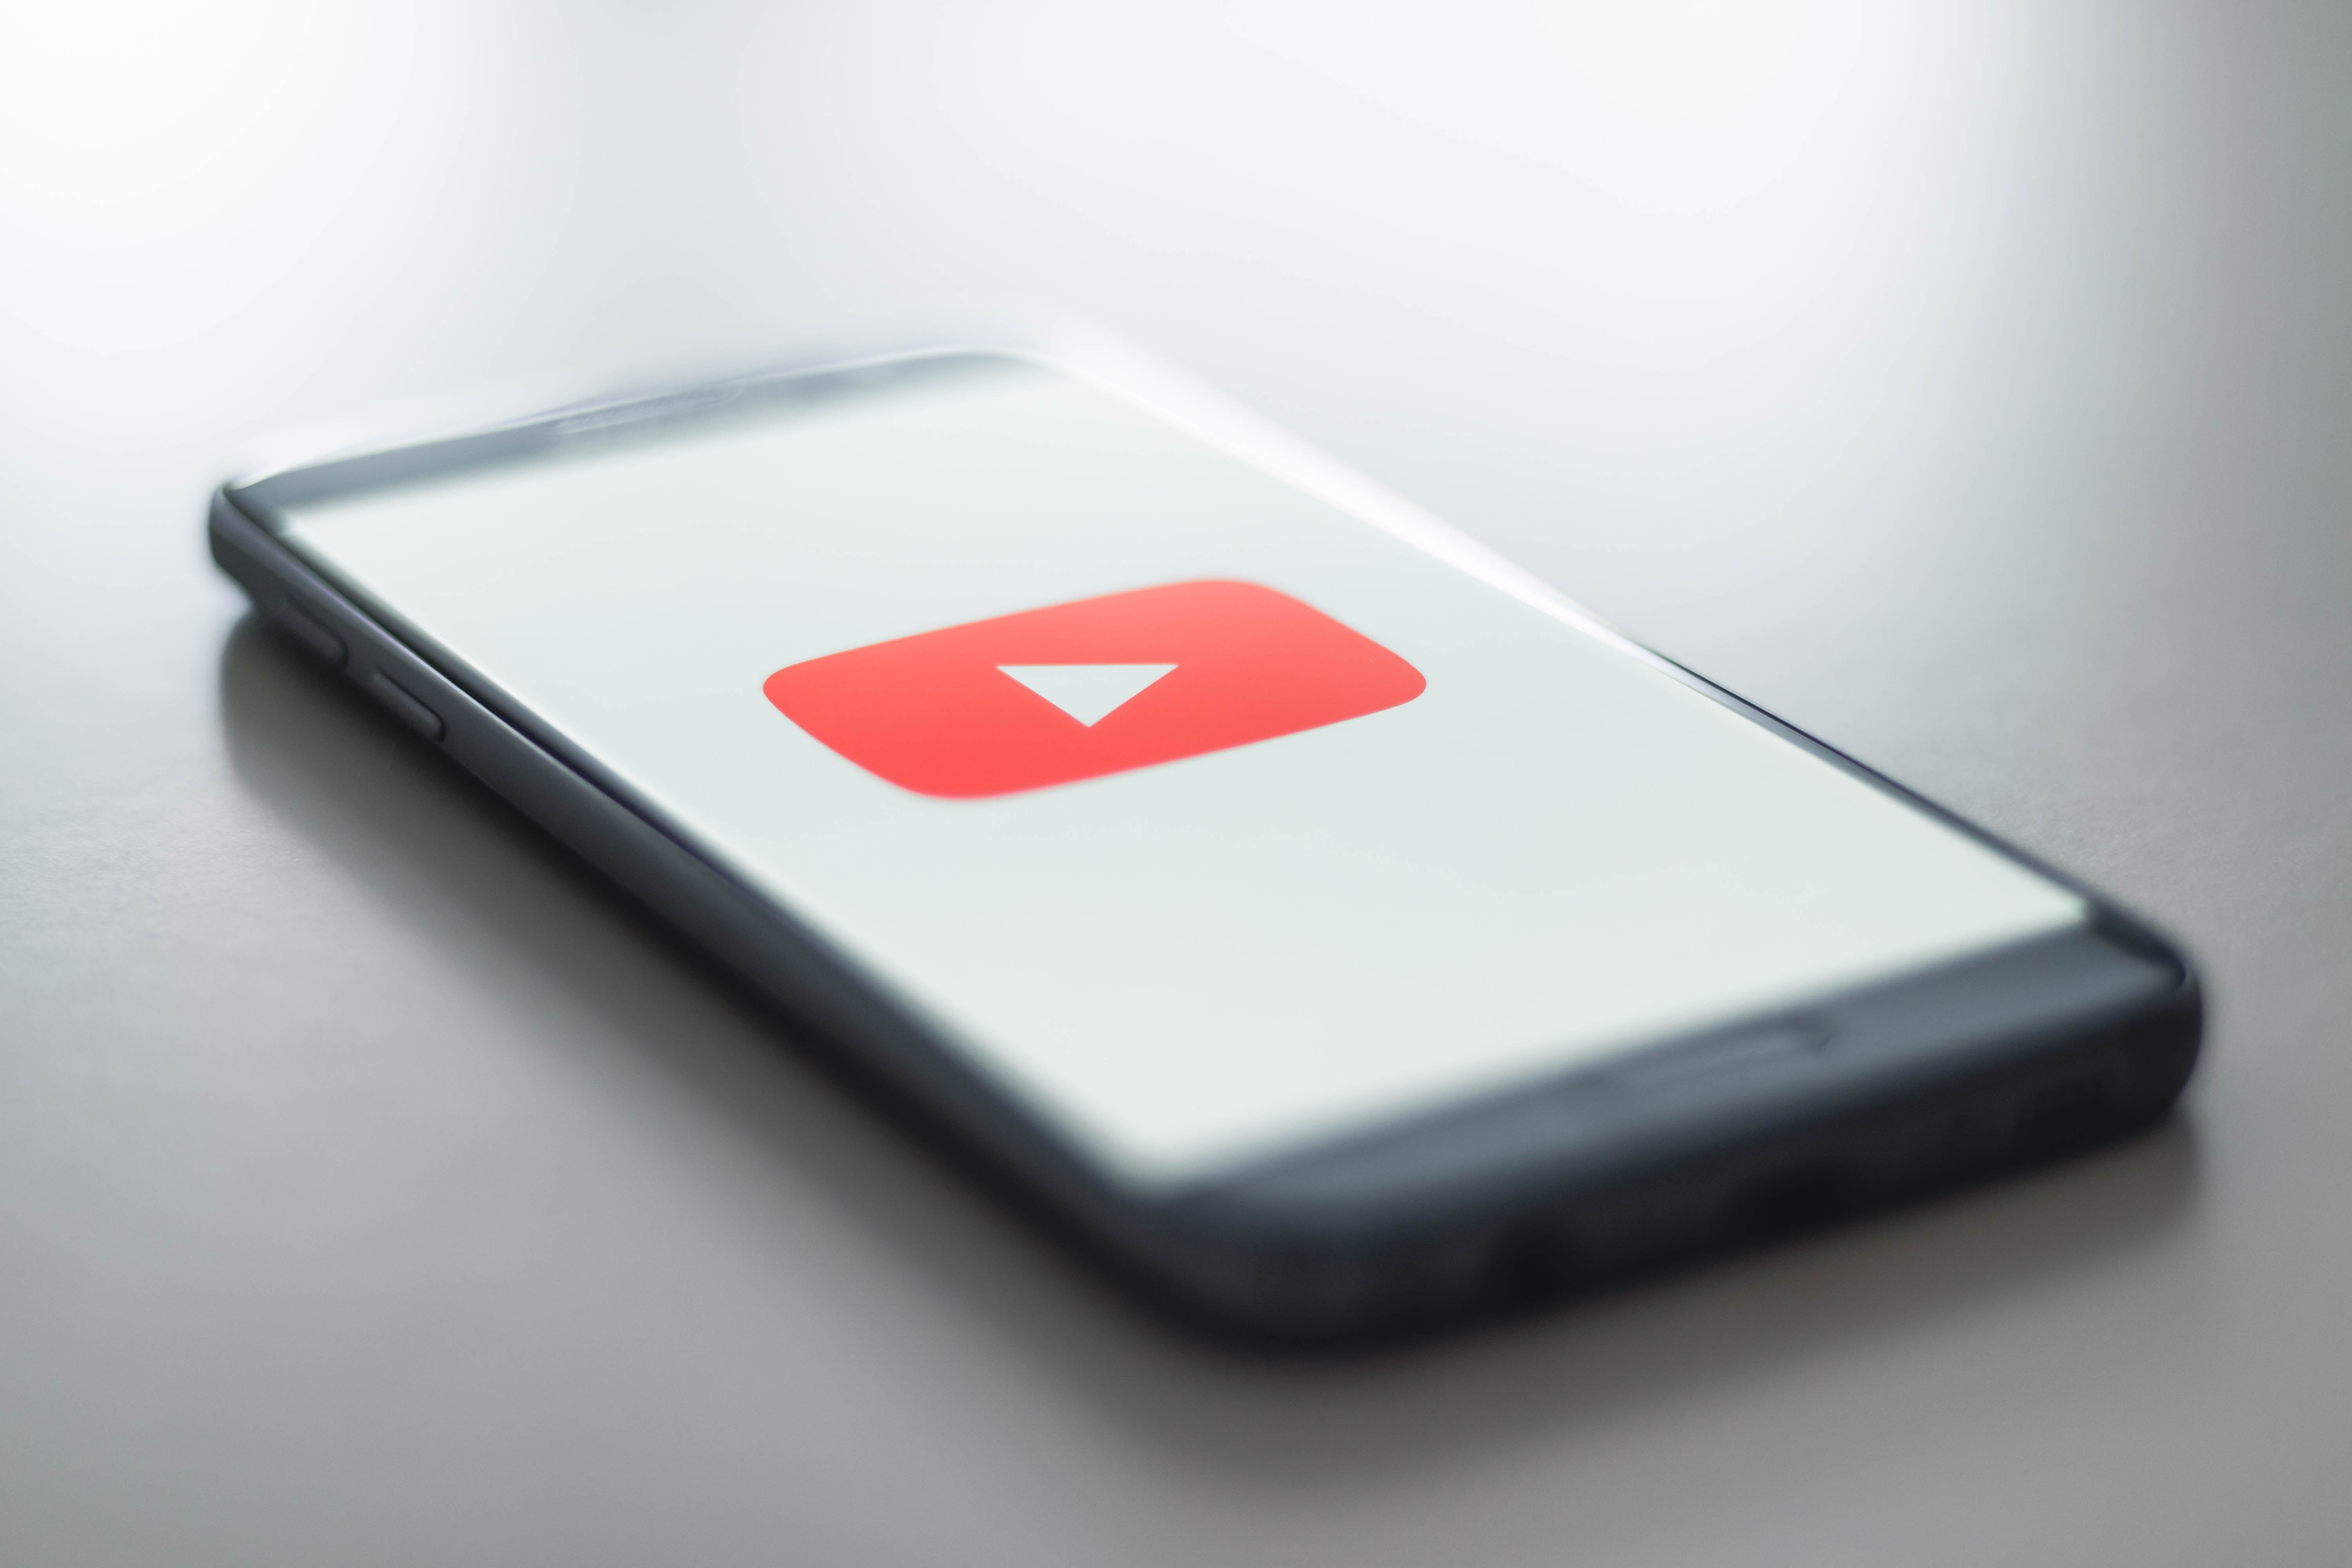 A phone sits on a flat surface. The phone is displaying the YouTube "play" video symbol of a red box with a white triangle.